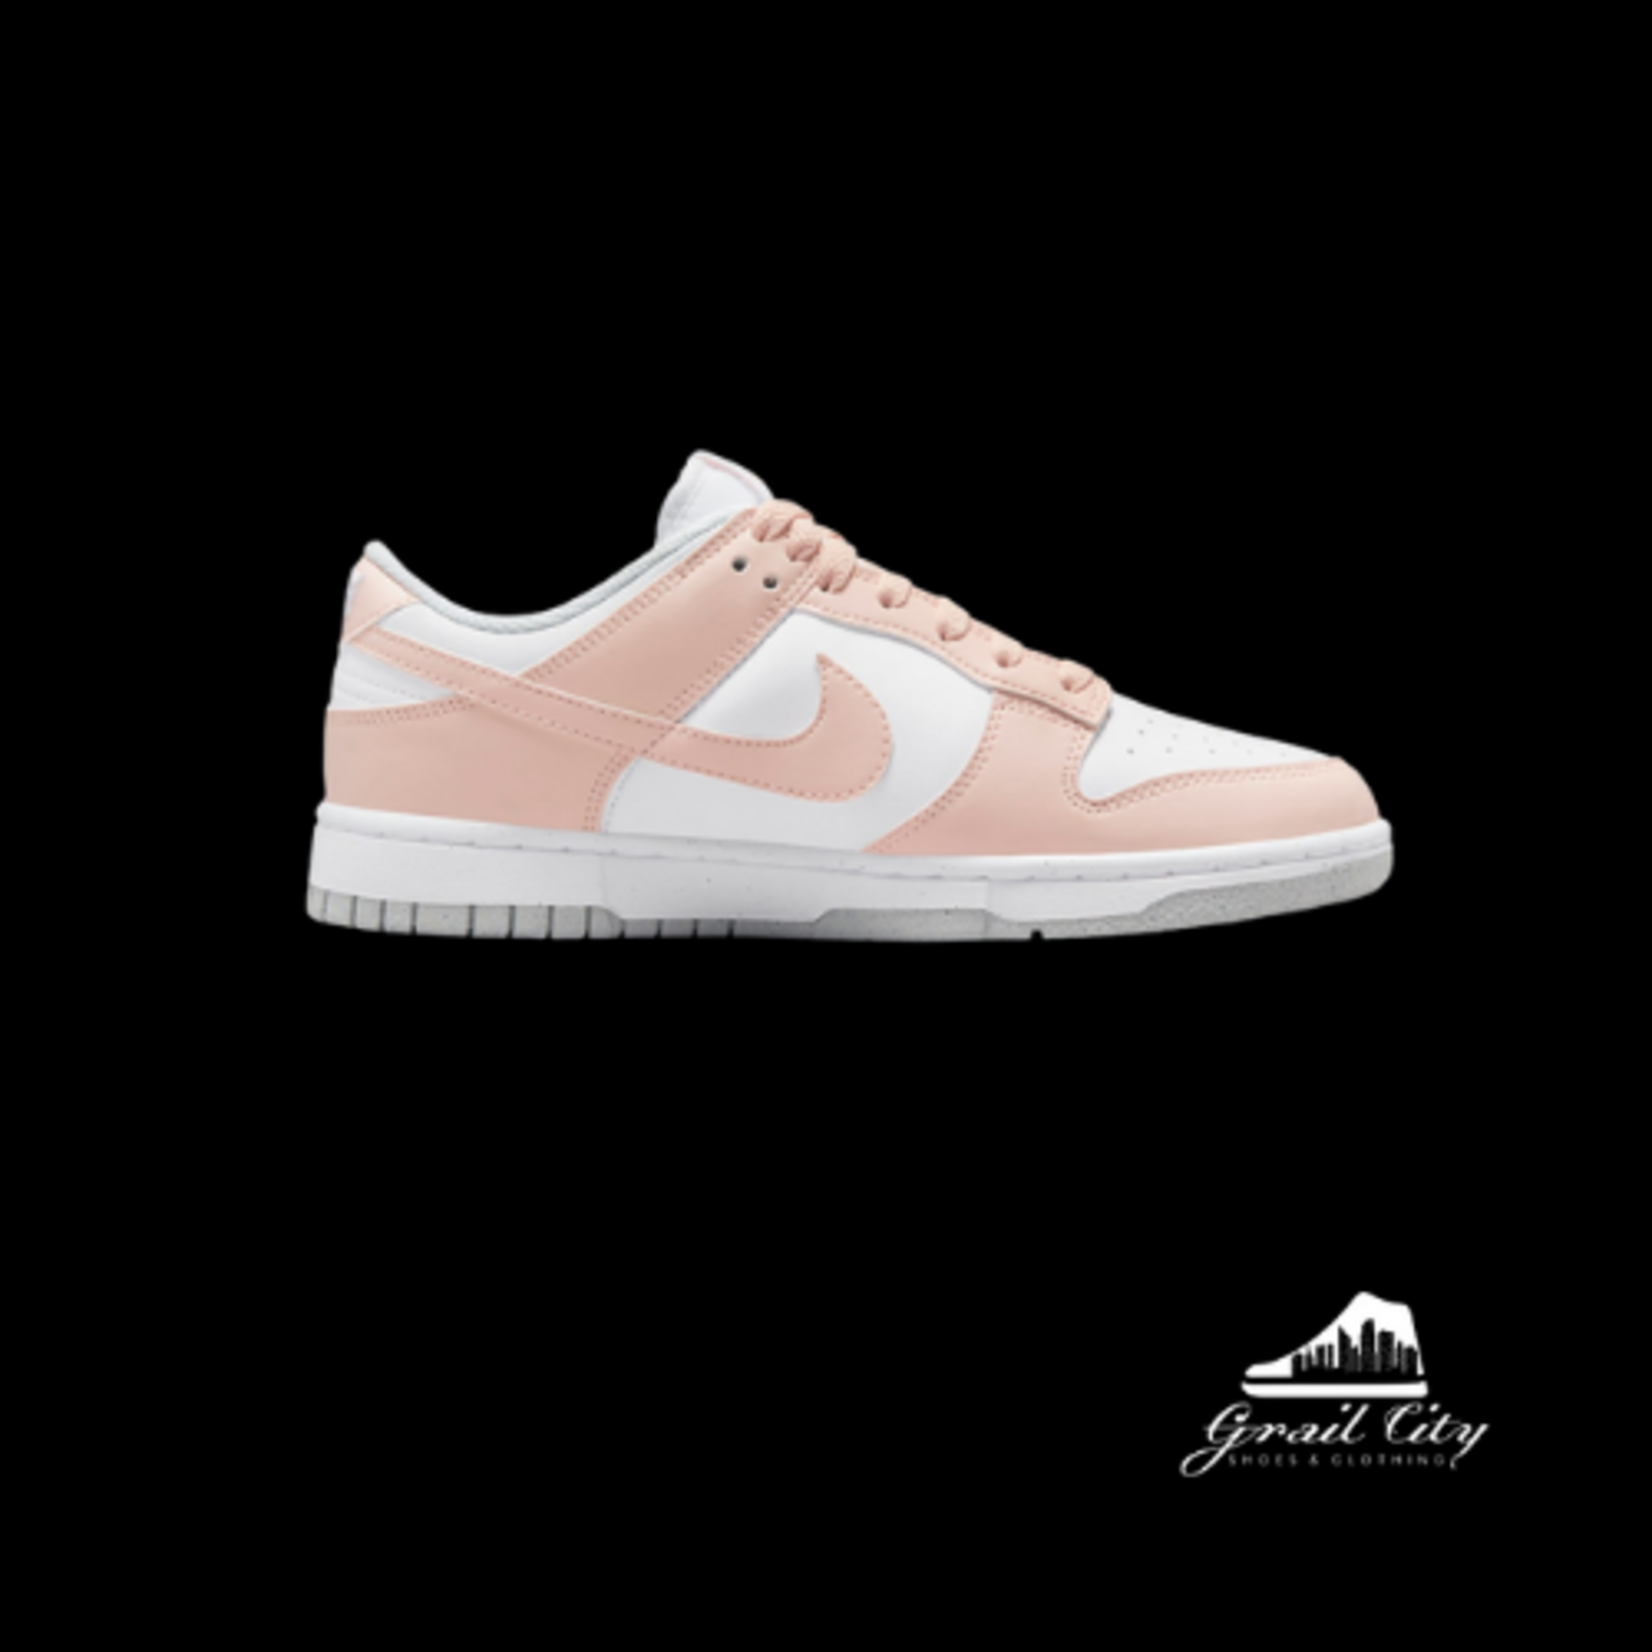 coral dunks